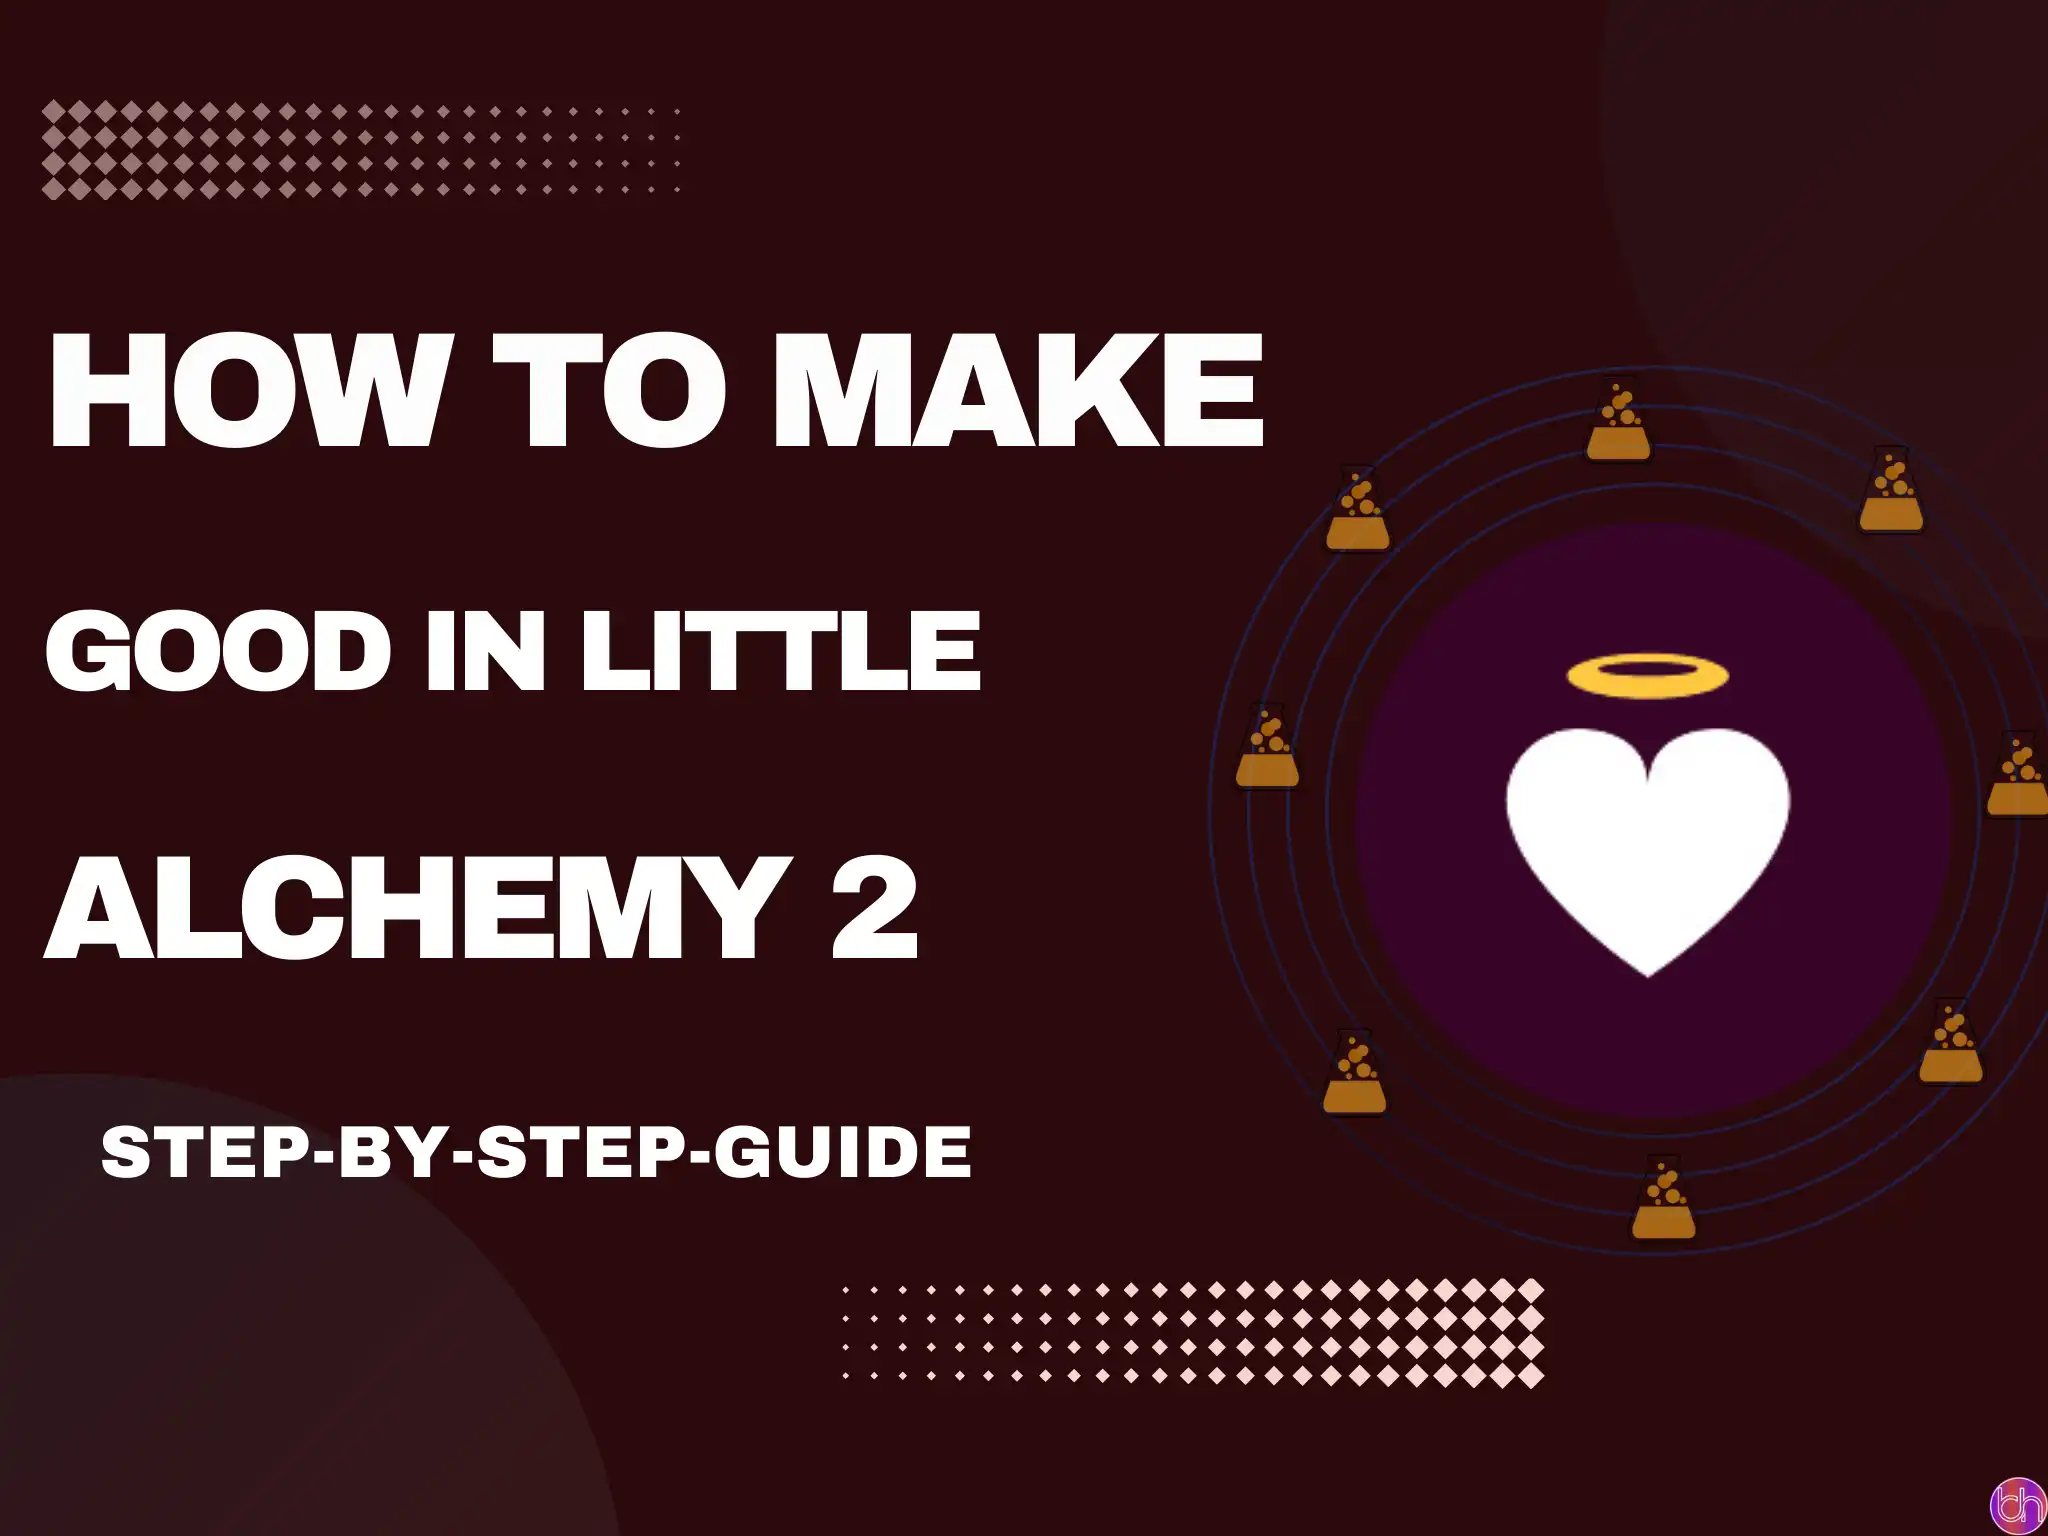 How to make Good in little alchemy 2